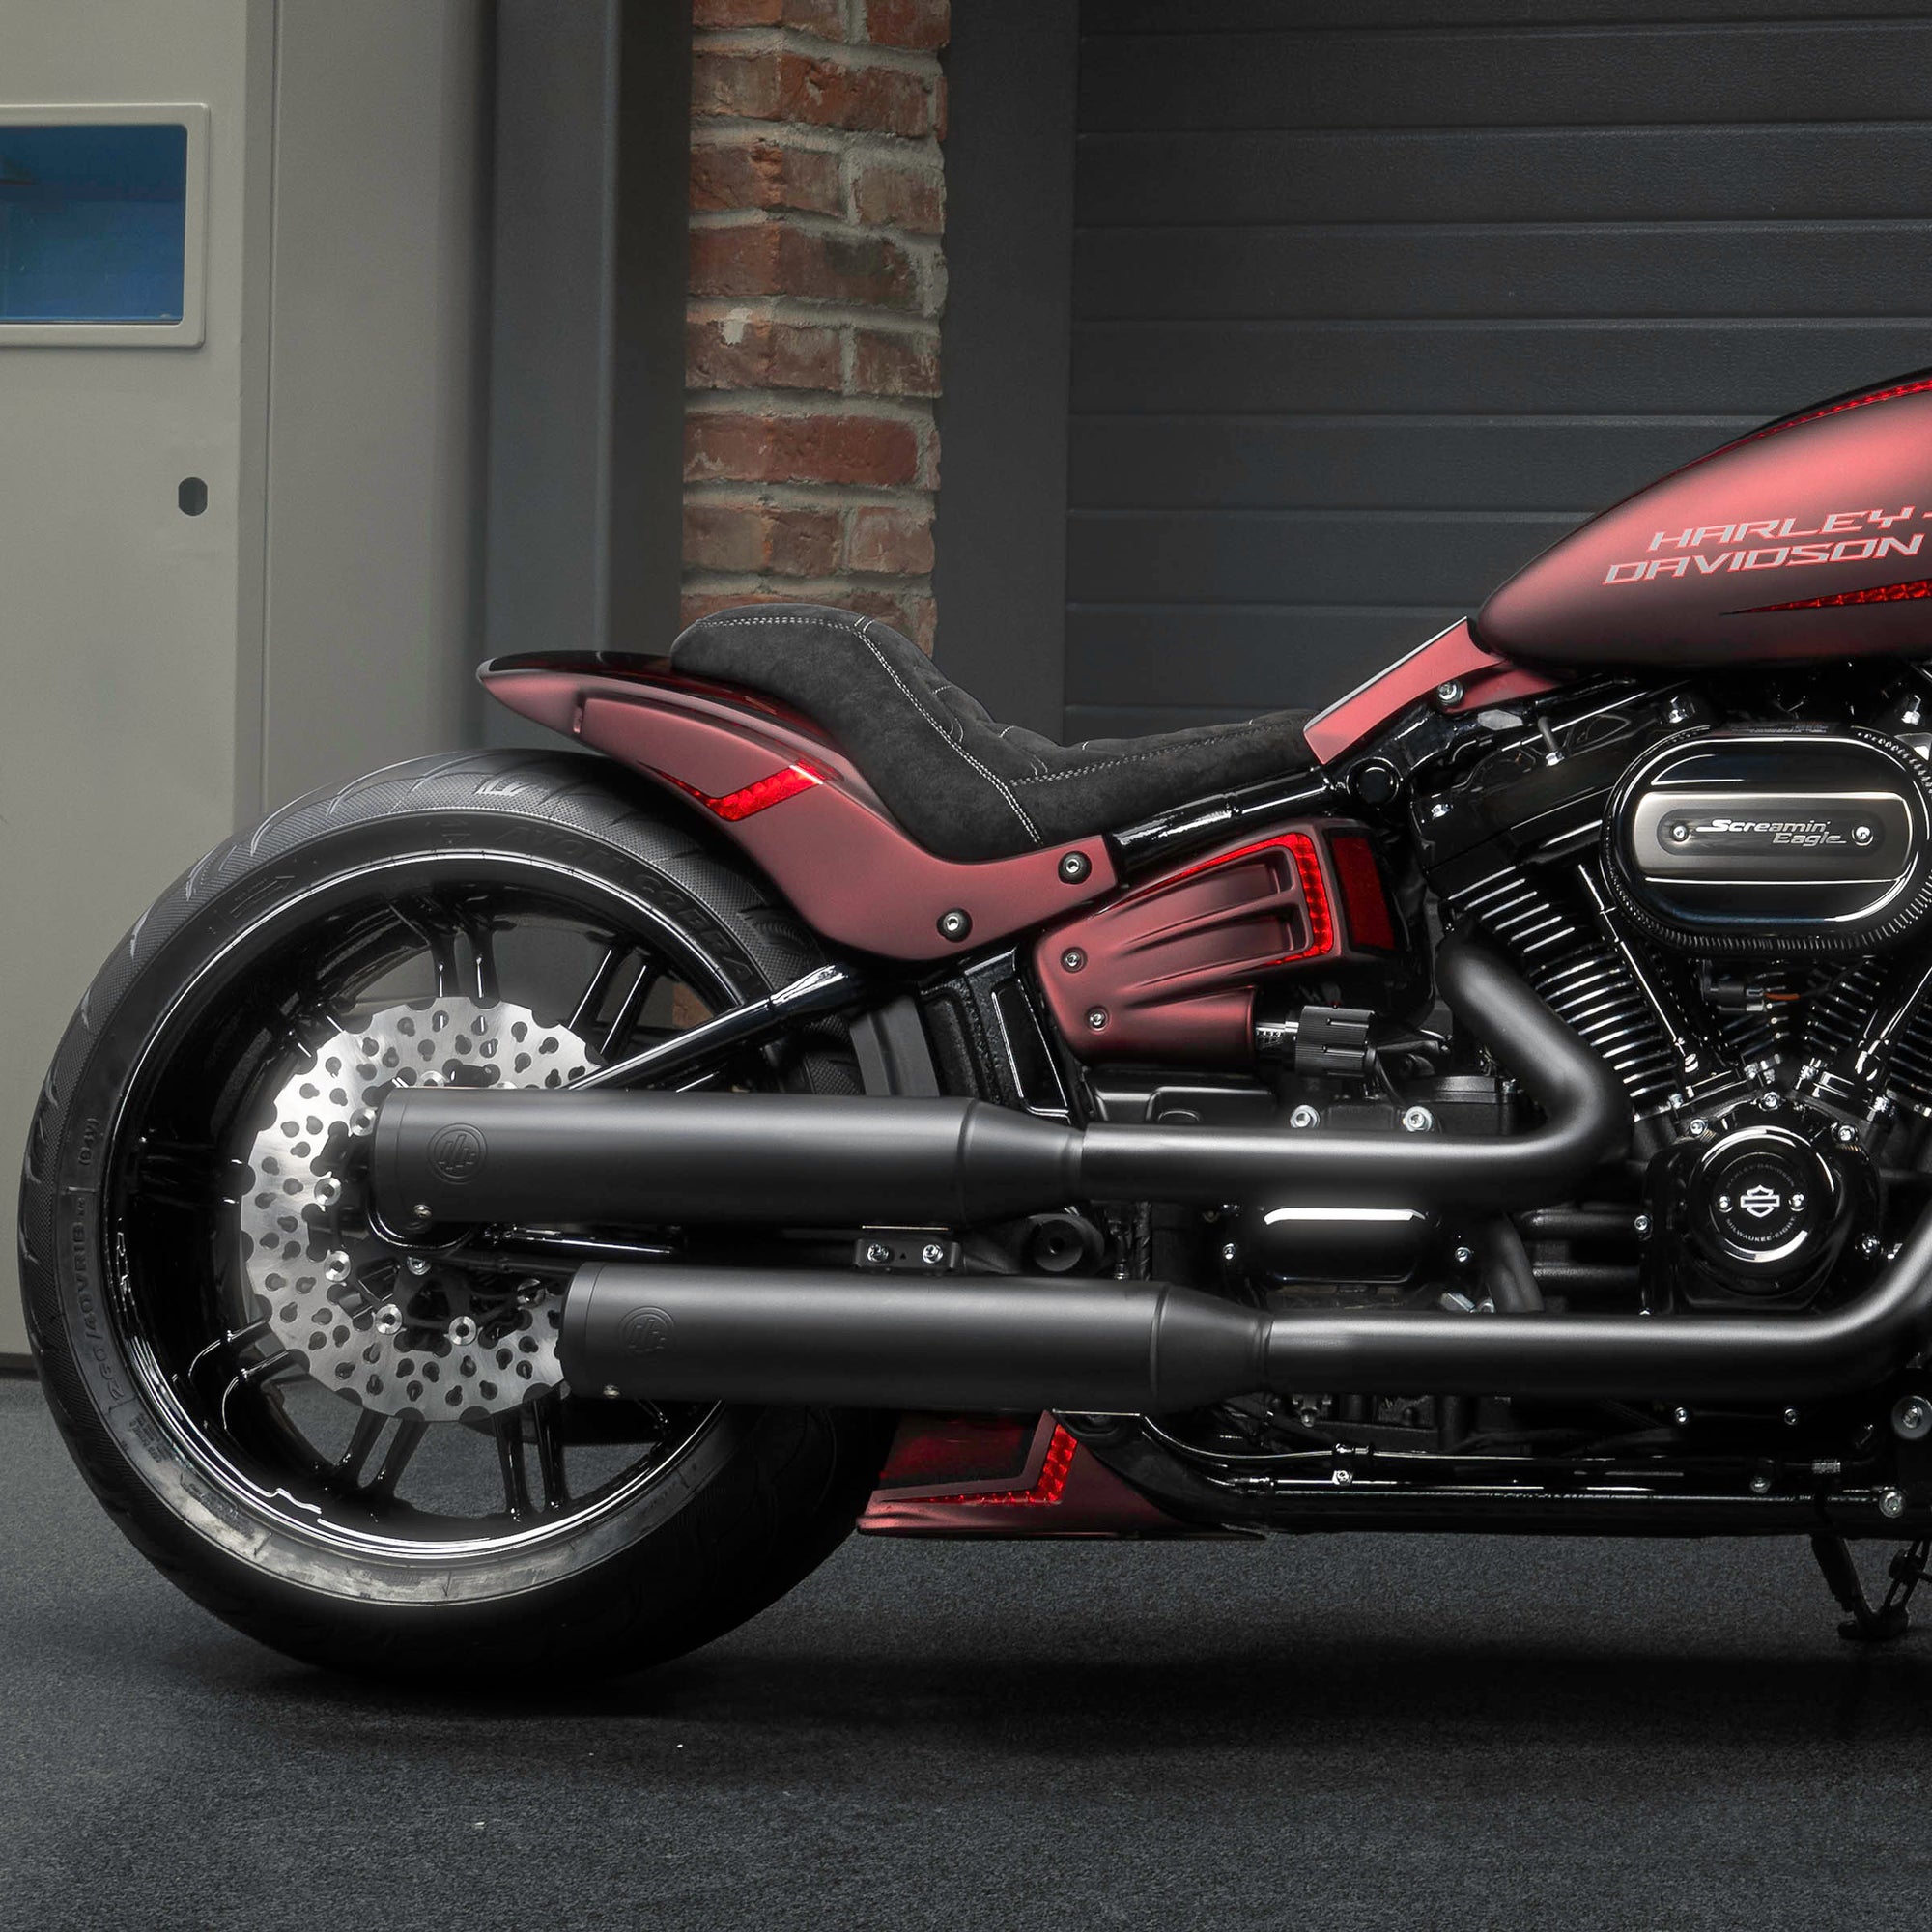 Zoomed Harley Davidson motorcycle with Killer Custom parts from the side in a modern garage